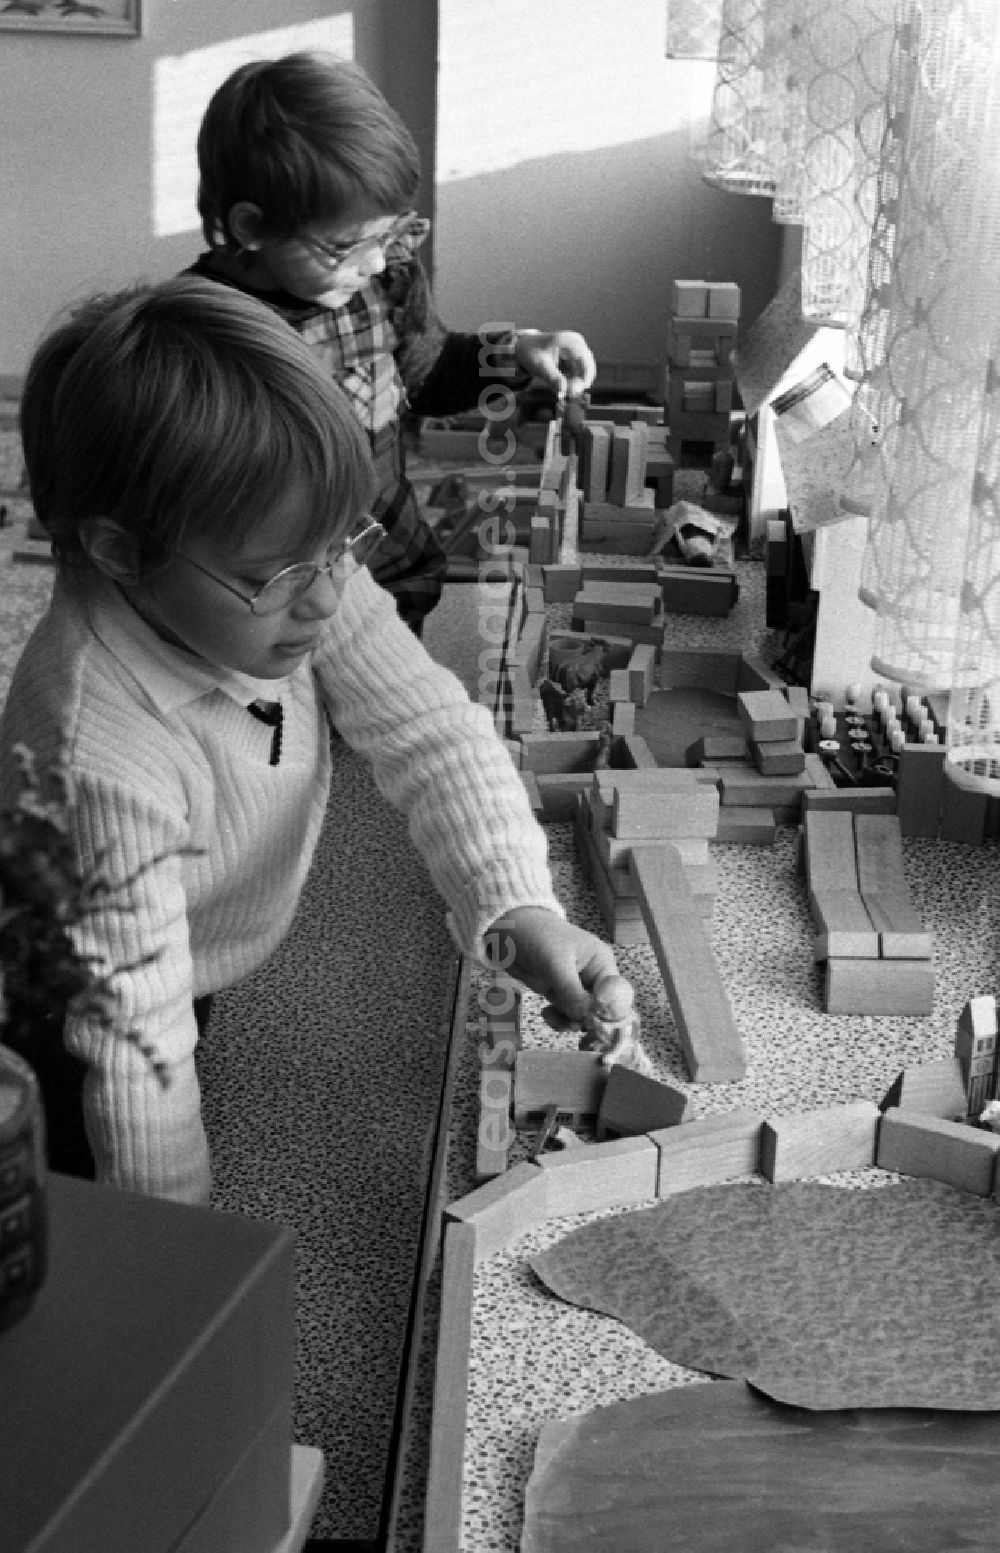 GDR photo archive: Berlin - Games and fun with toddlers in kindergarten in the district Mitte in Berlin Eastberlin, the former capital of the GDR, German Democratic Republic